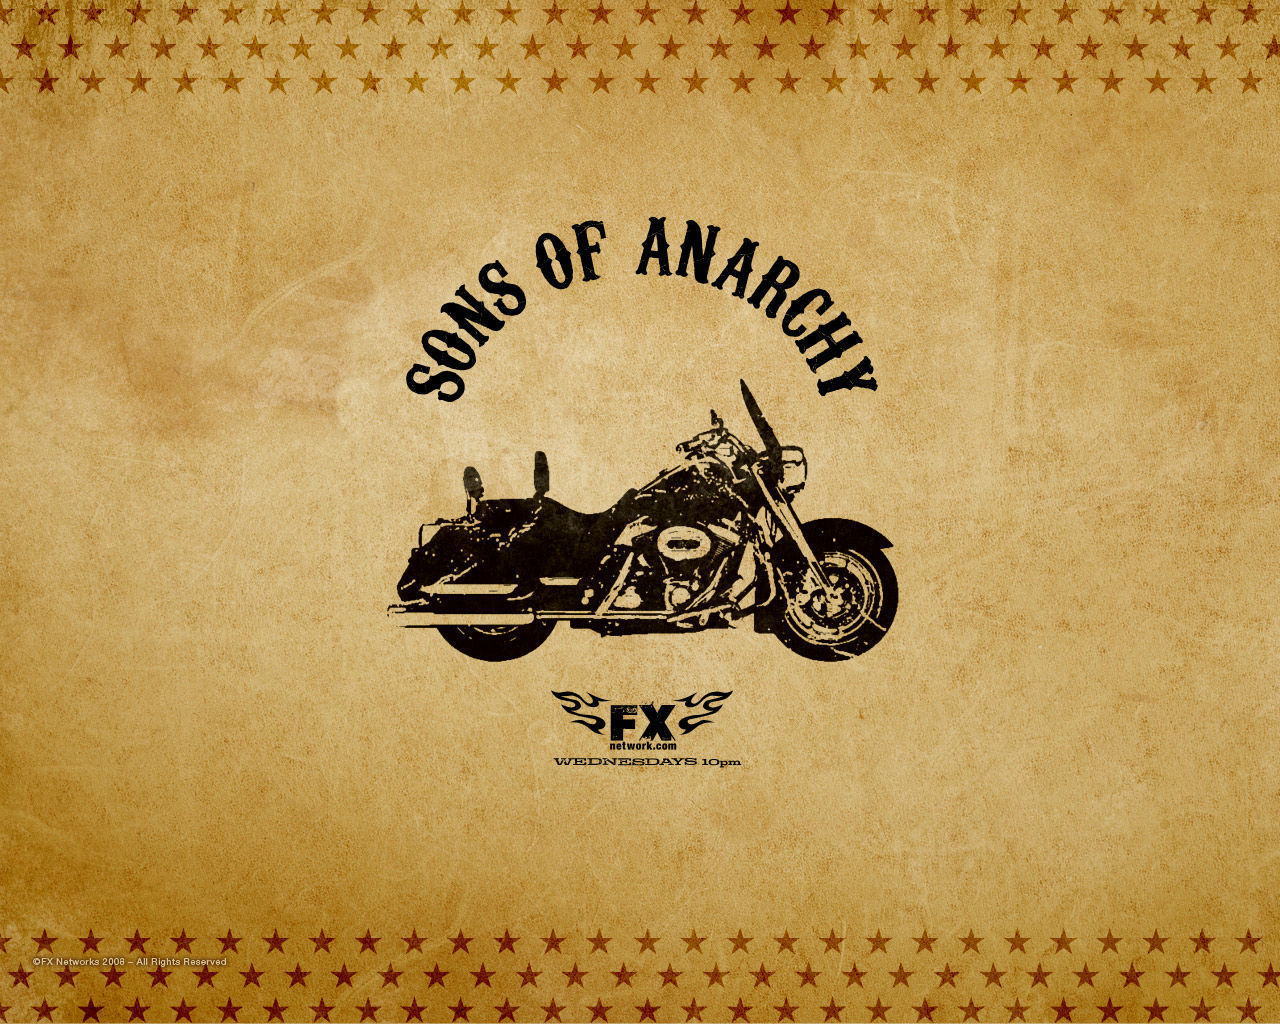 Sons Of Anarchy Image Wallpaper Photos